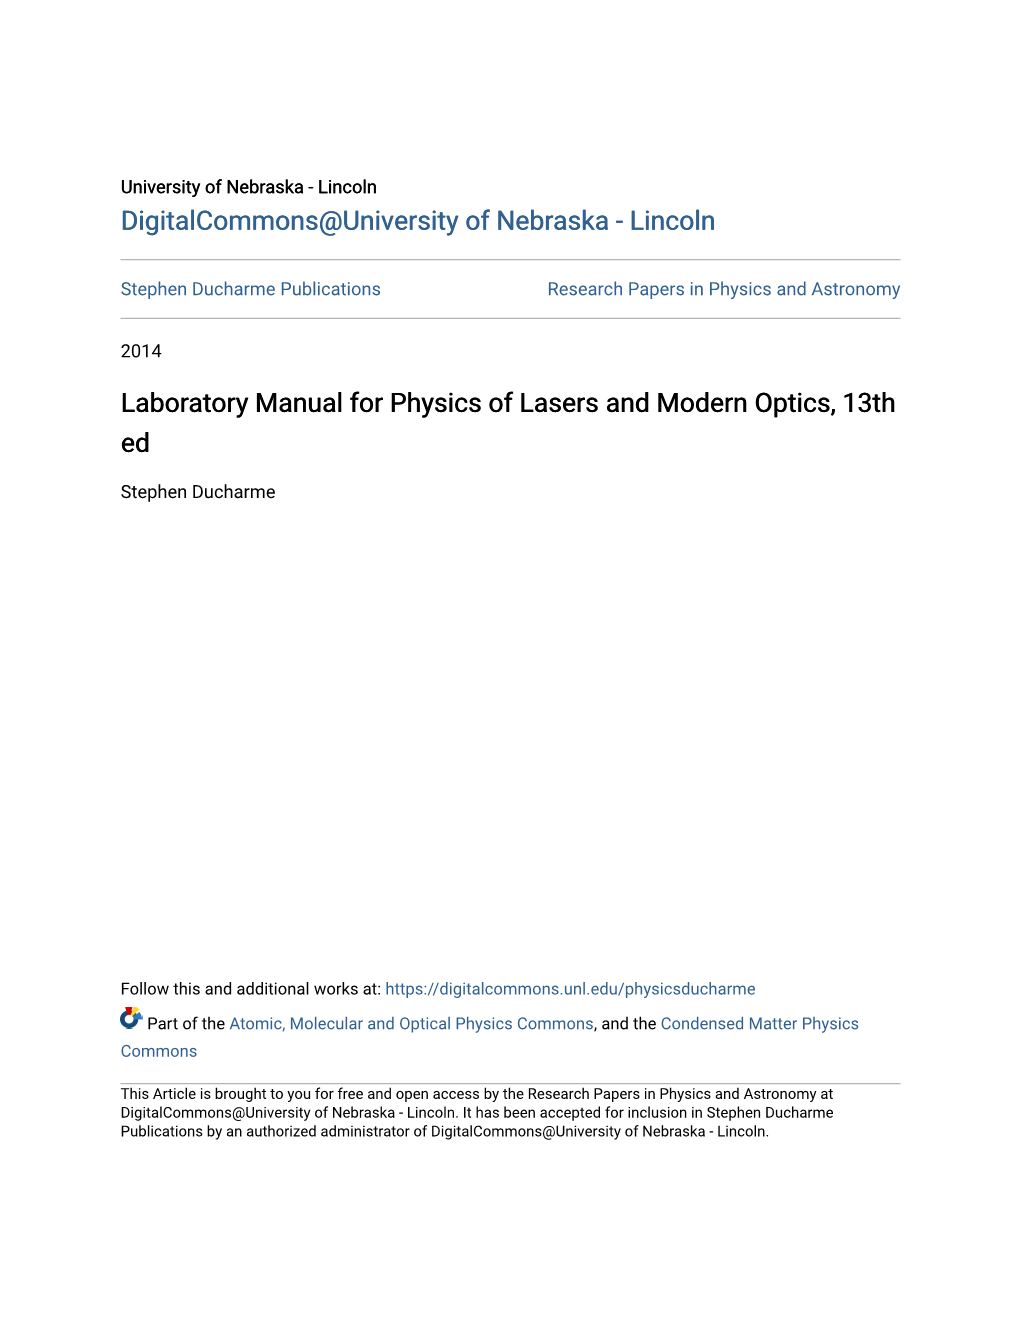 Laboratory Manual for Physics of Lasers and Modern Optics, 13Th Ed